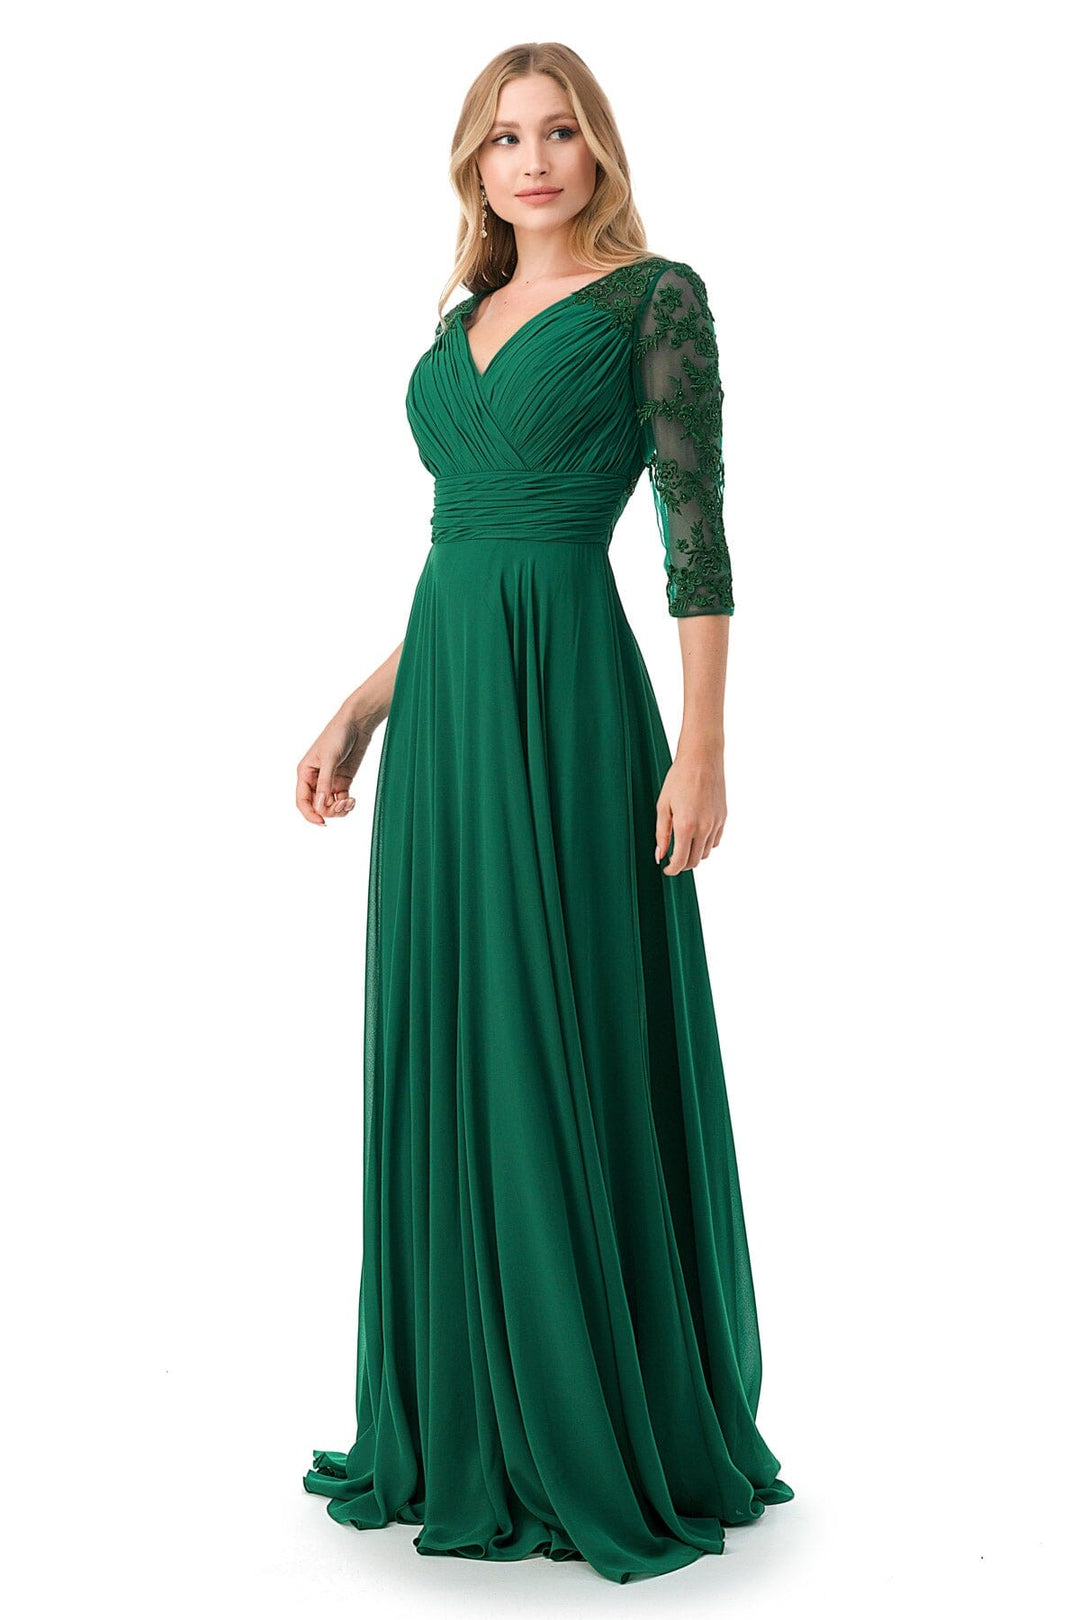 Ruched Applique 3/4 Sleeve A-line Gown by Coya M2733F